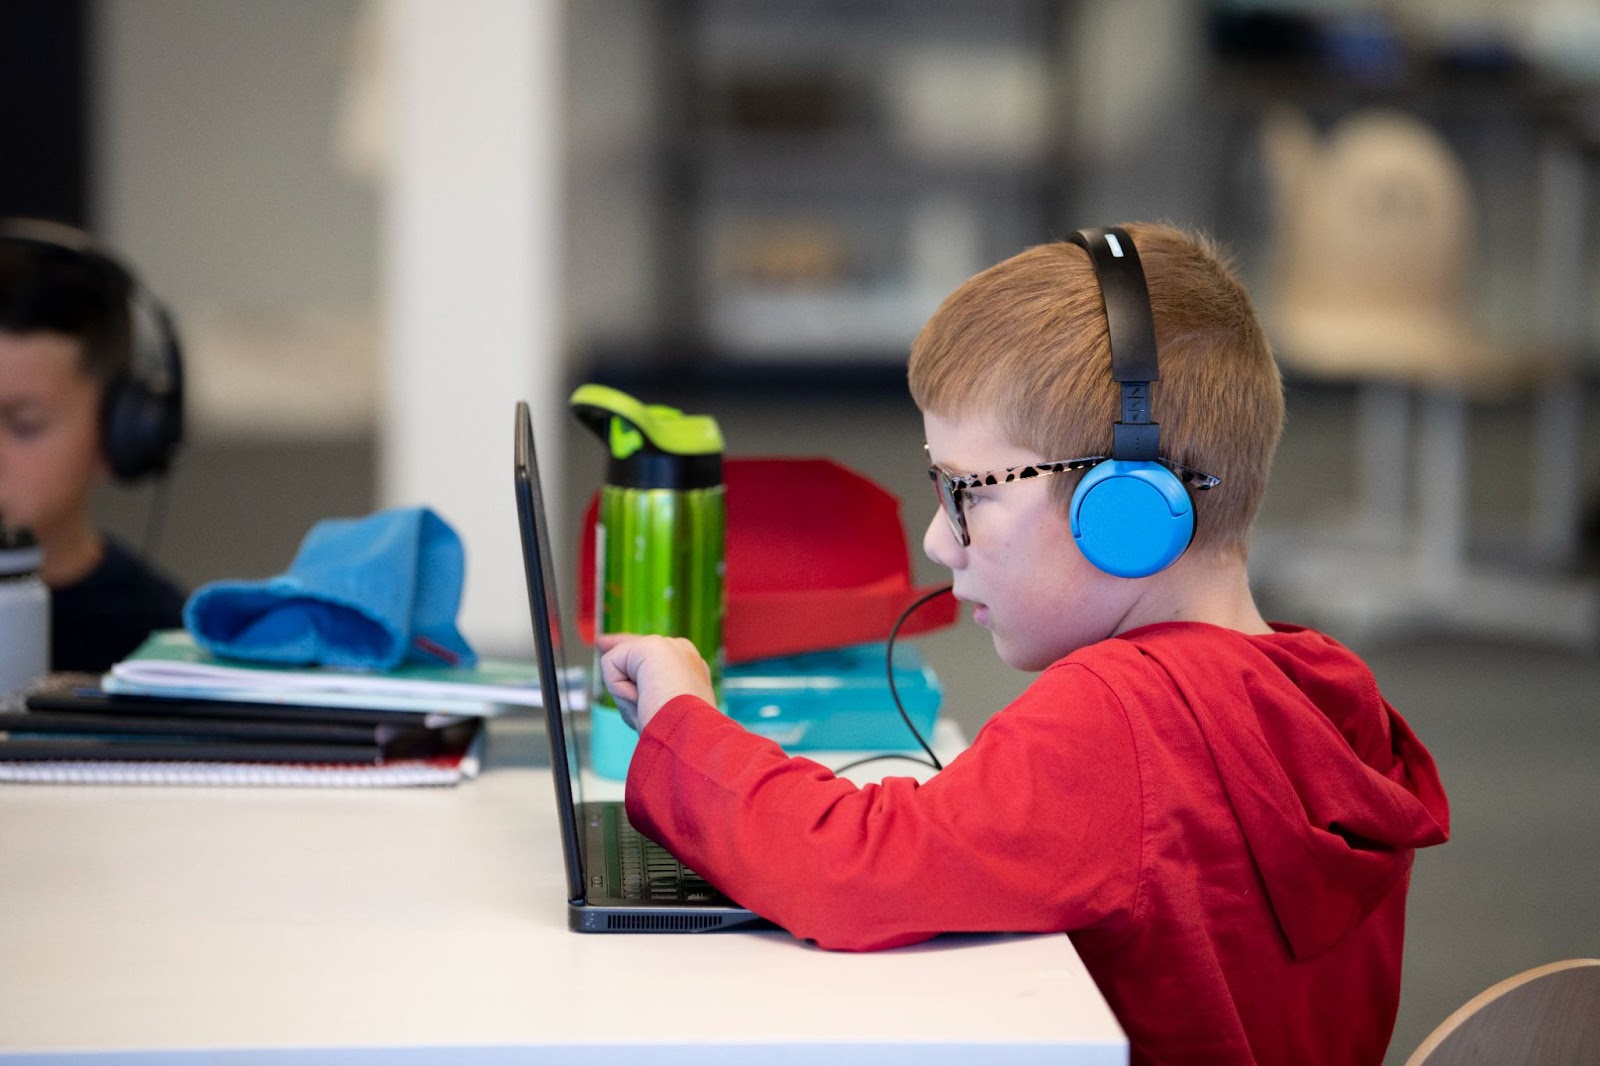 A young child with headphones on doing schoolwork on his computer